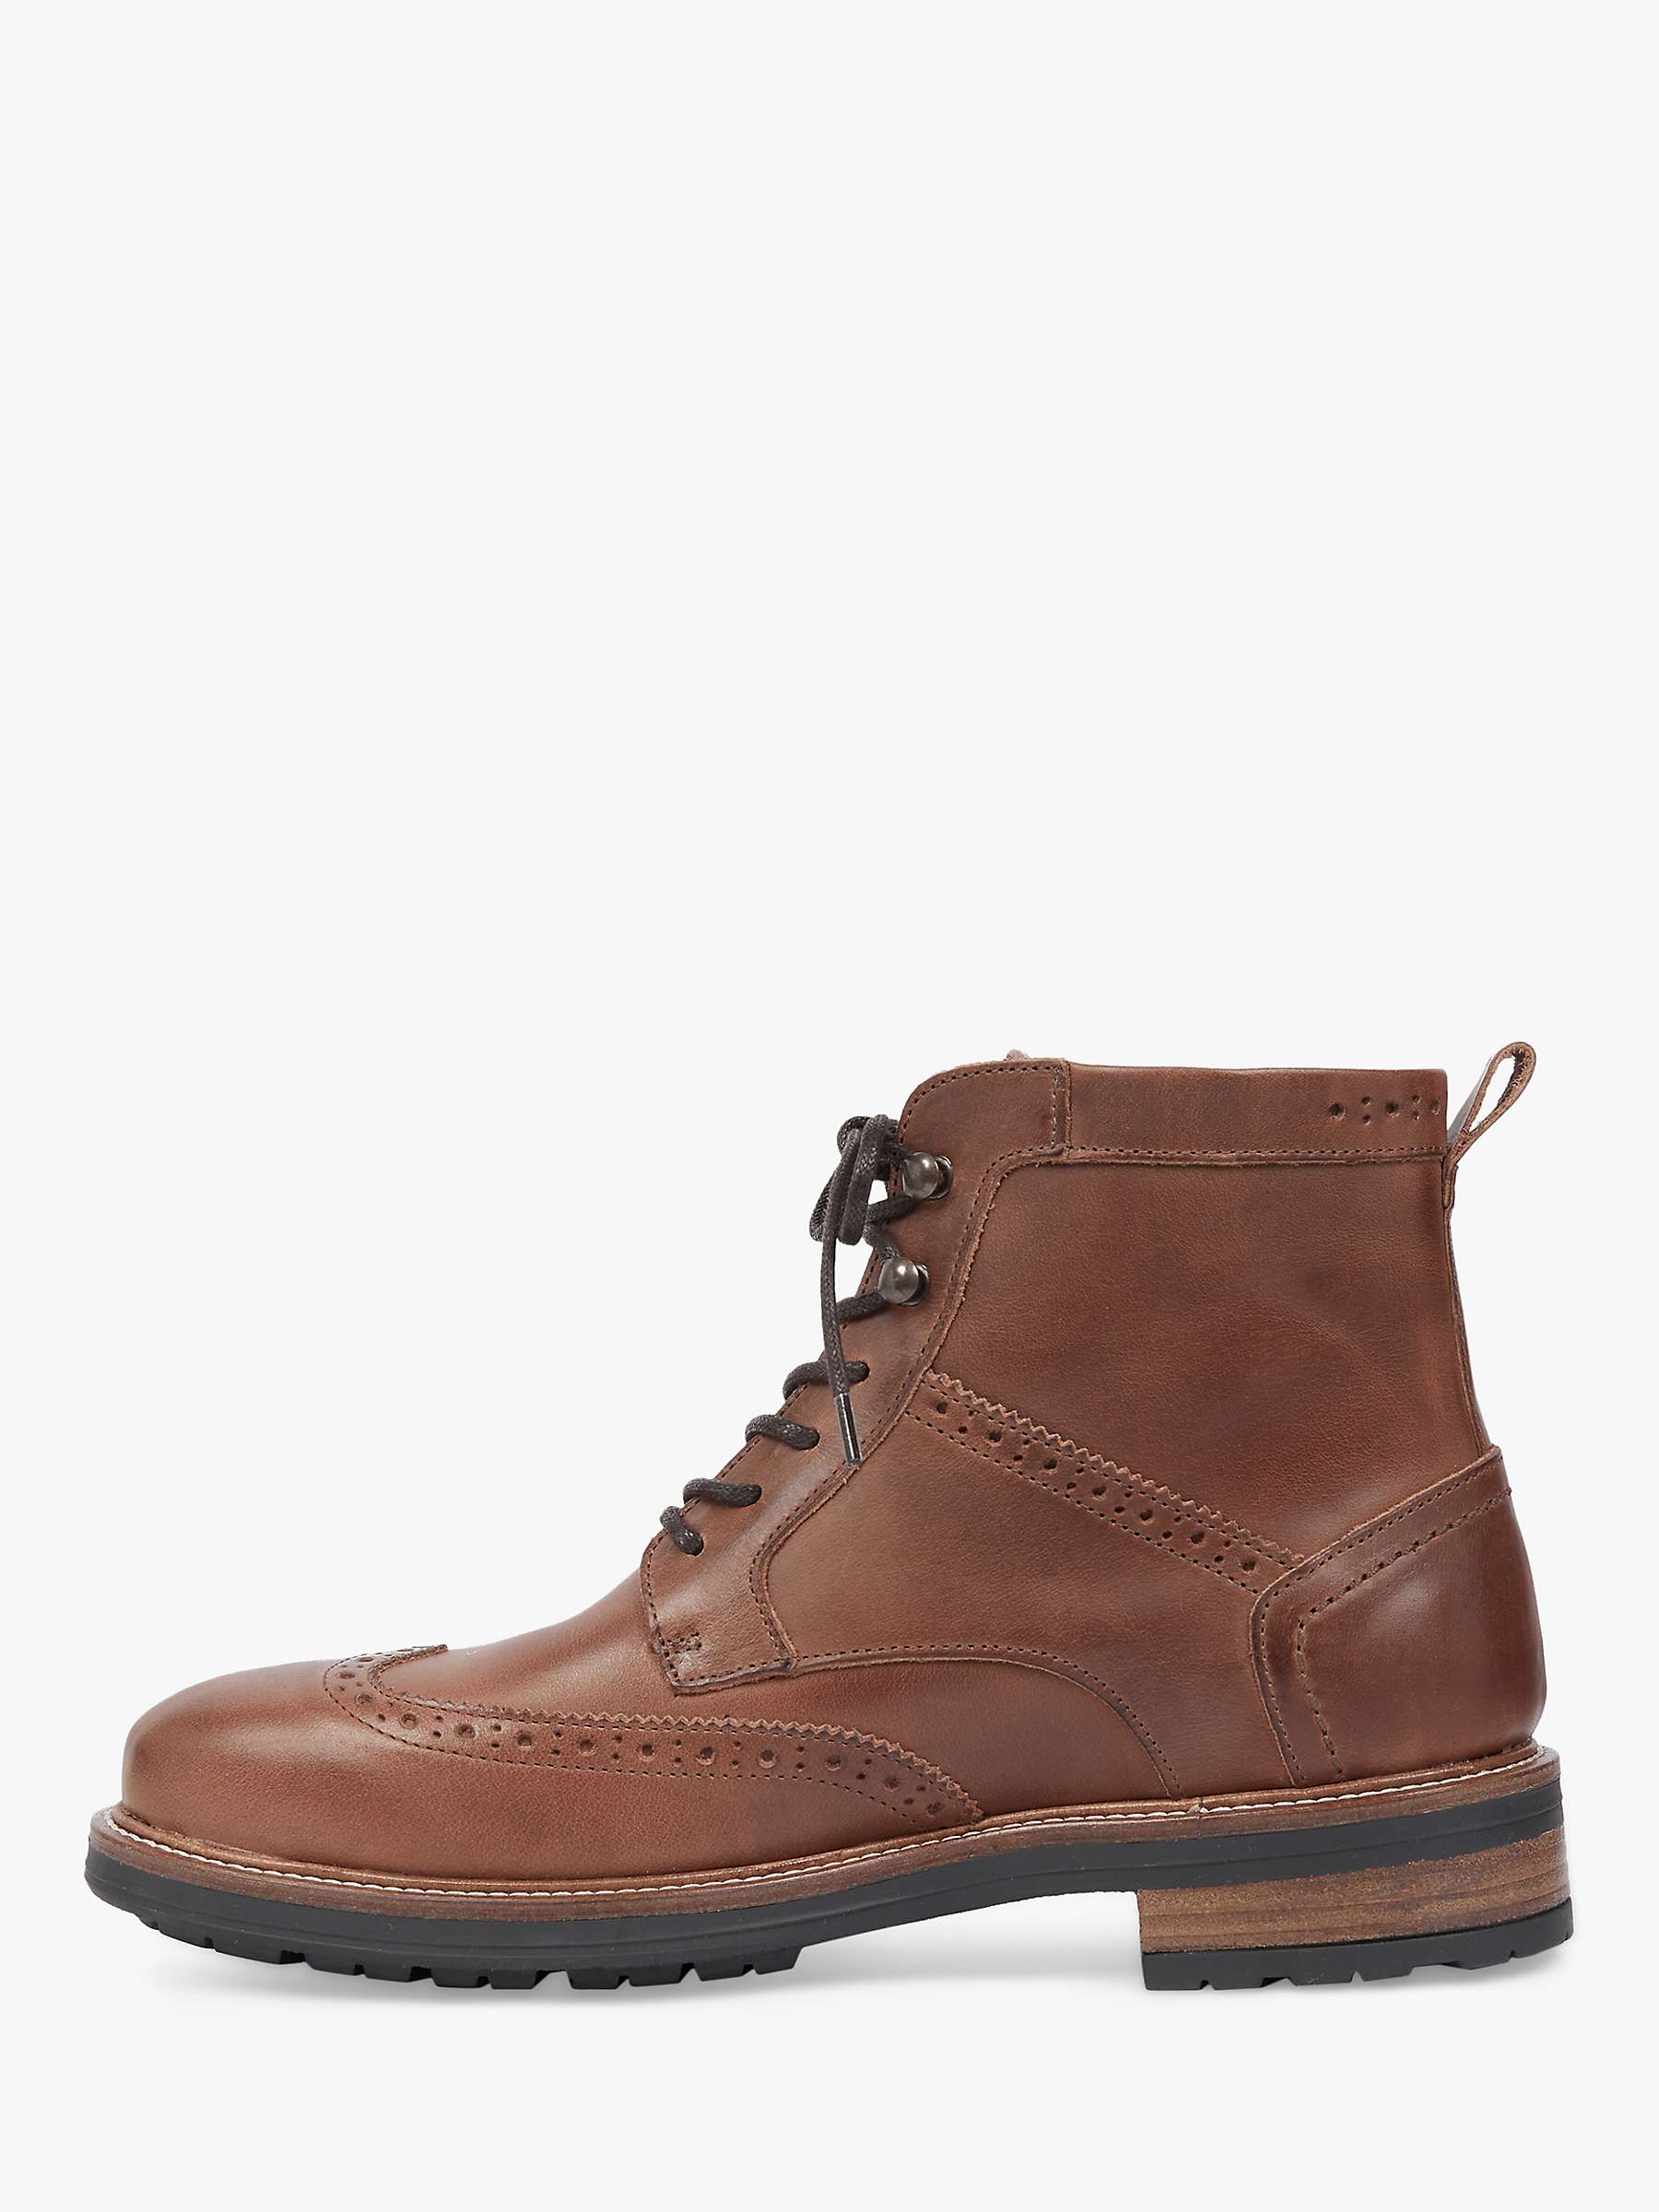 Buy Celtic & Co. Lace Up Brogue Boot, Tan Online at johnlewis.com